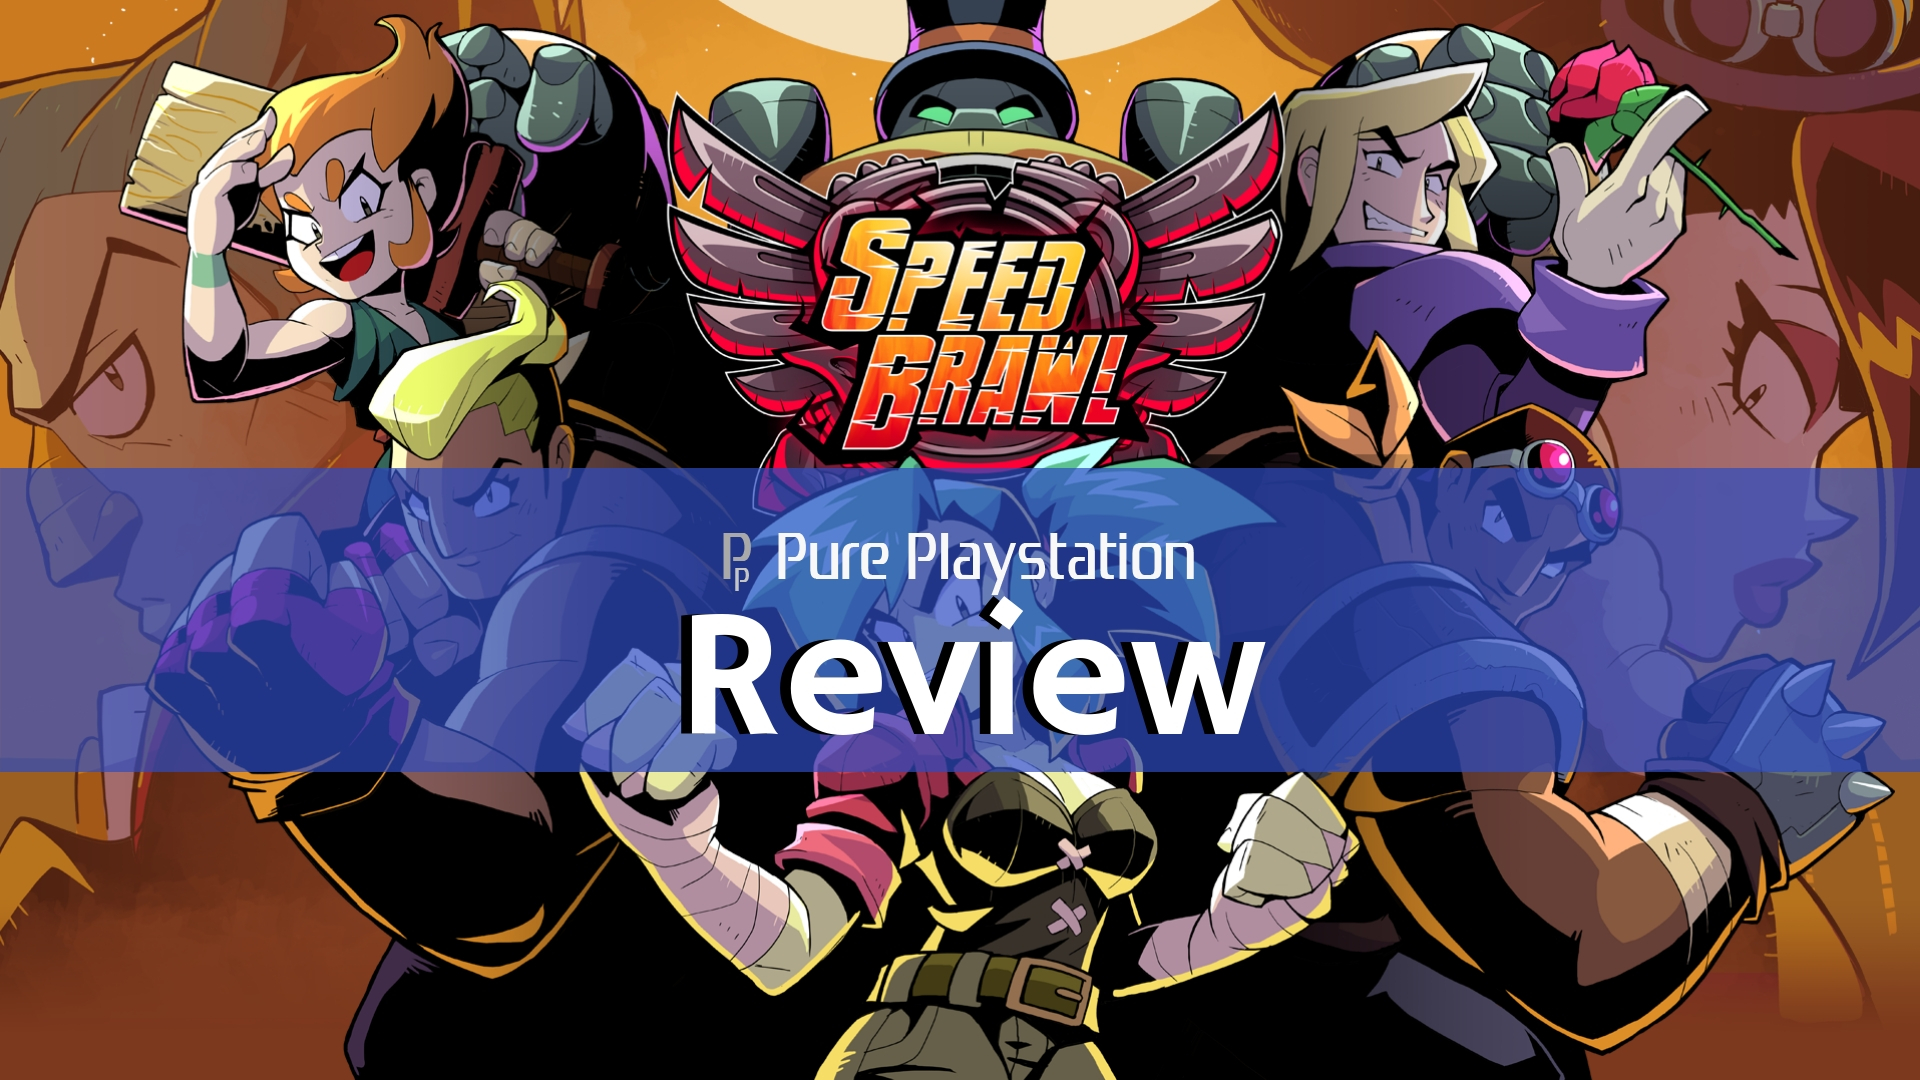 Review: Speed Brawl - PS4